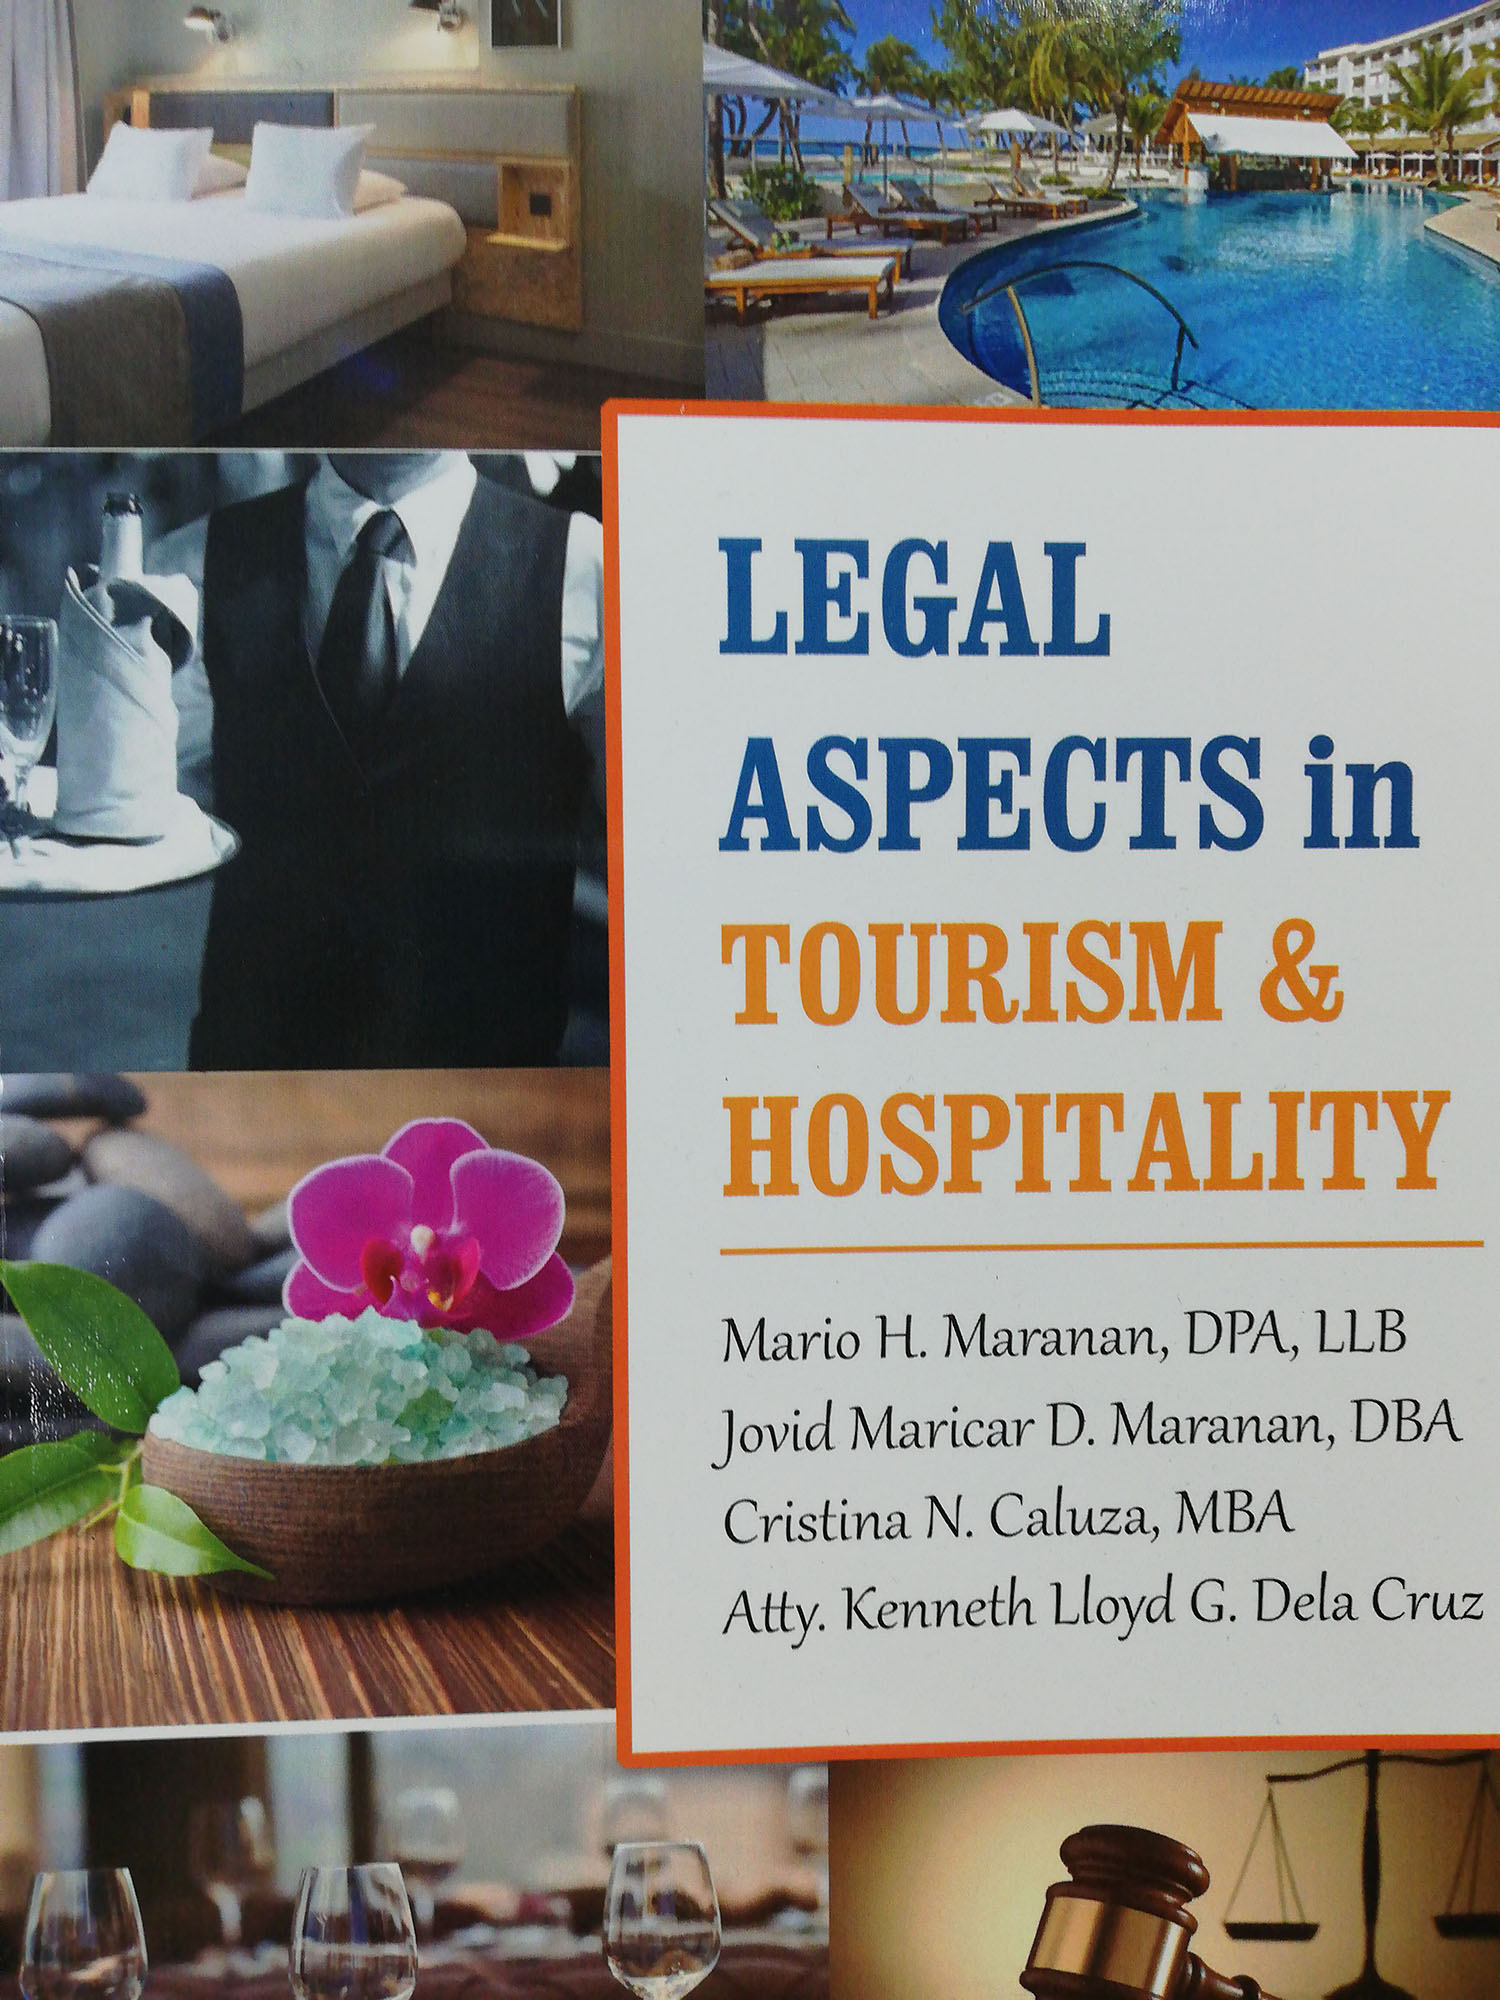 thesis title about tourism and hospitality